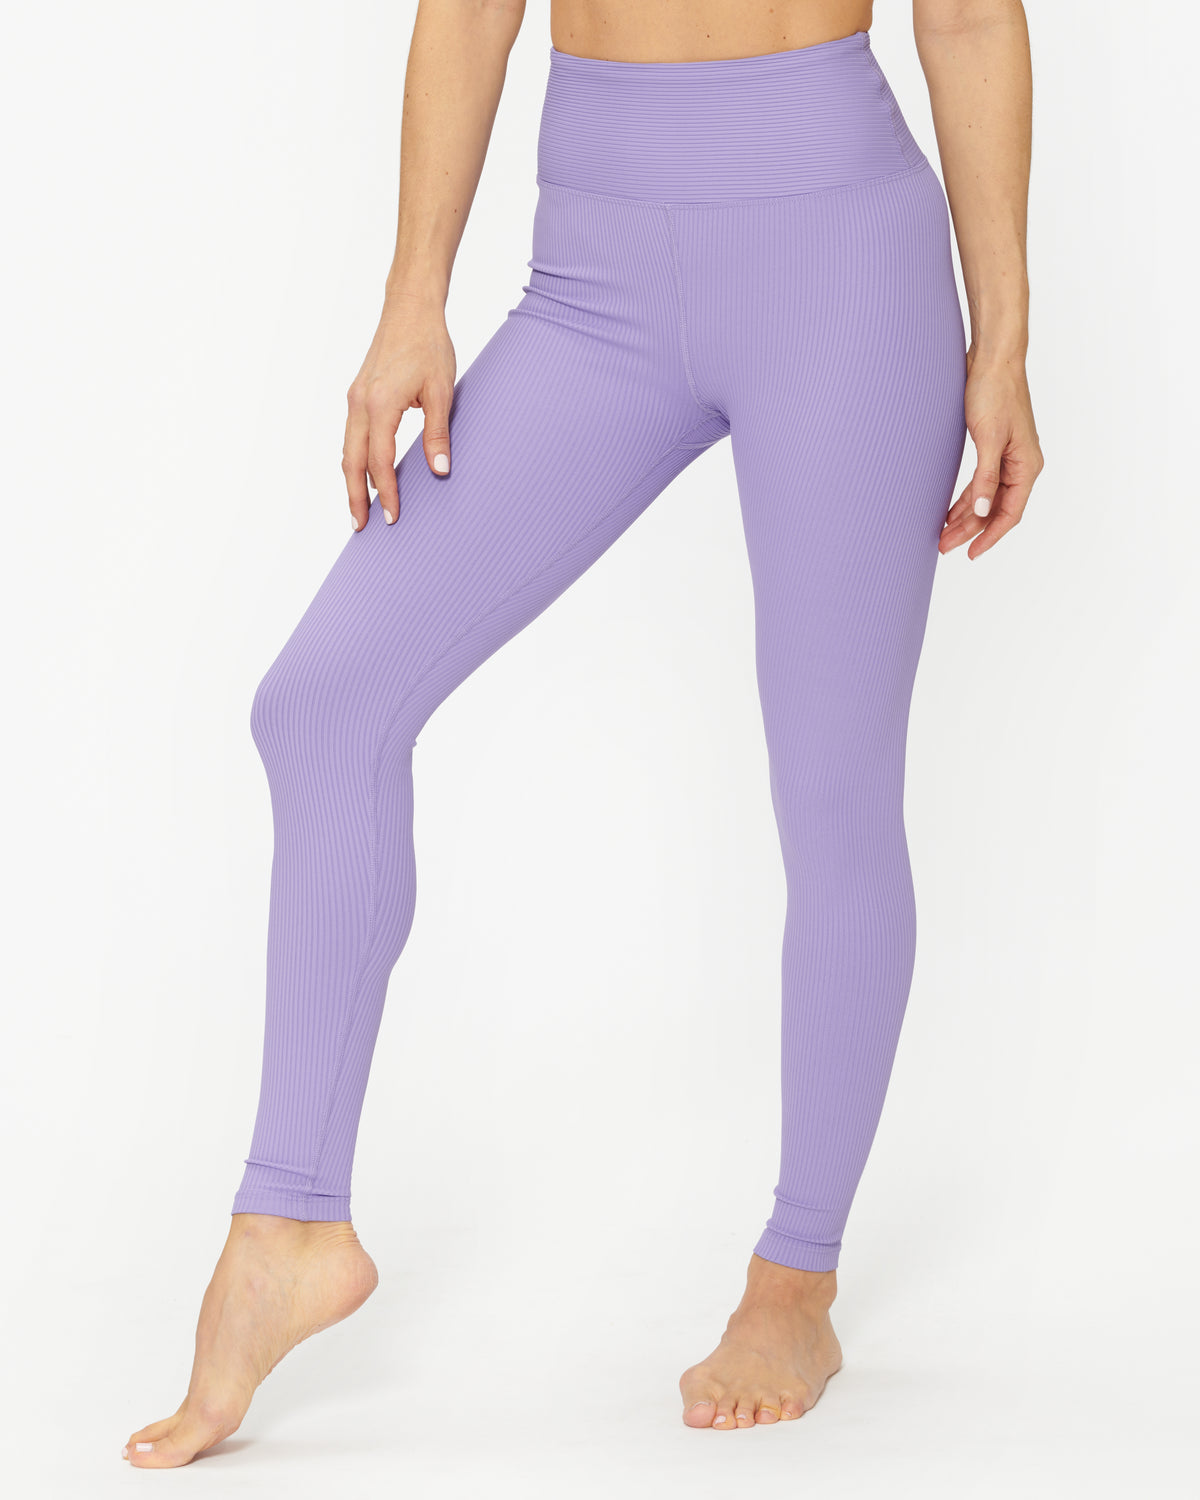 Year Of Ours Thermal High-Waisted Legging